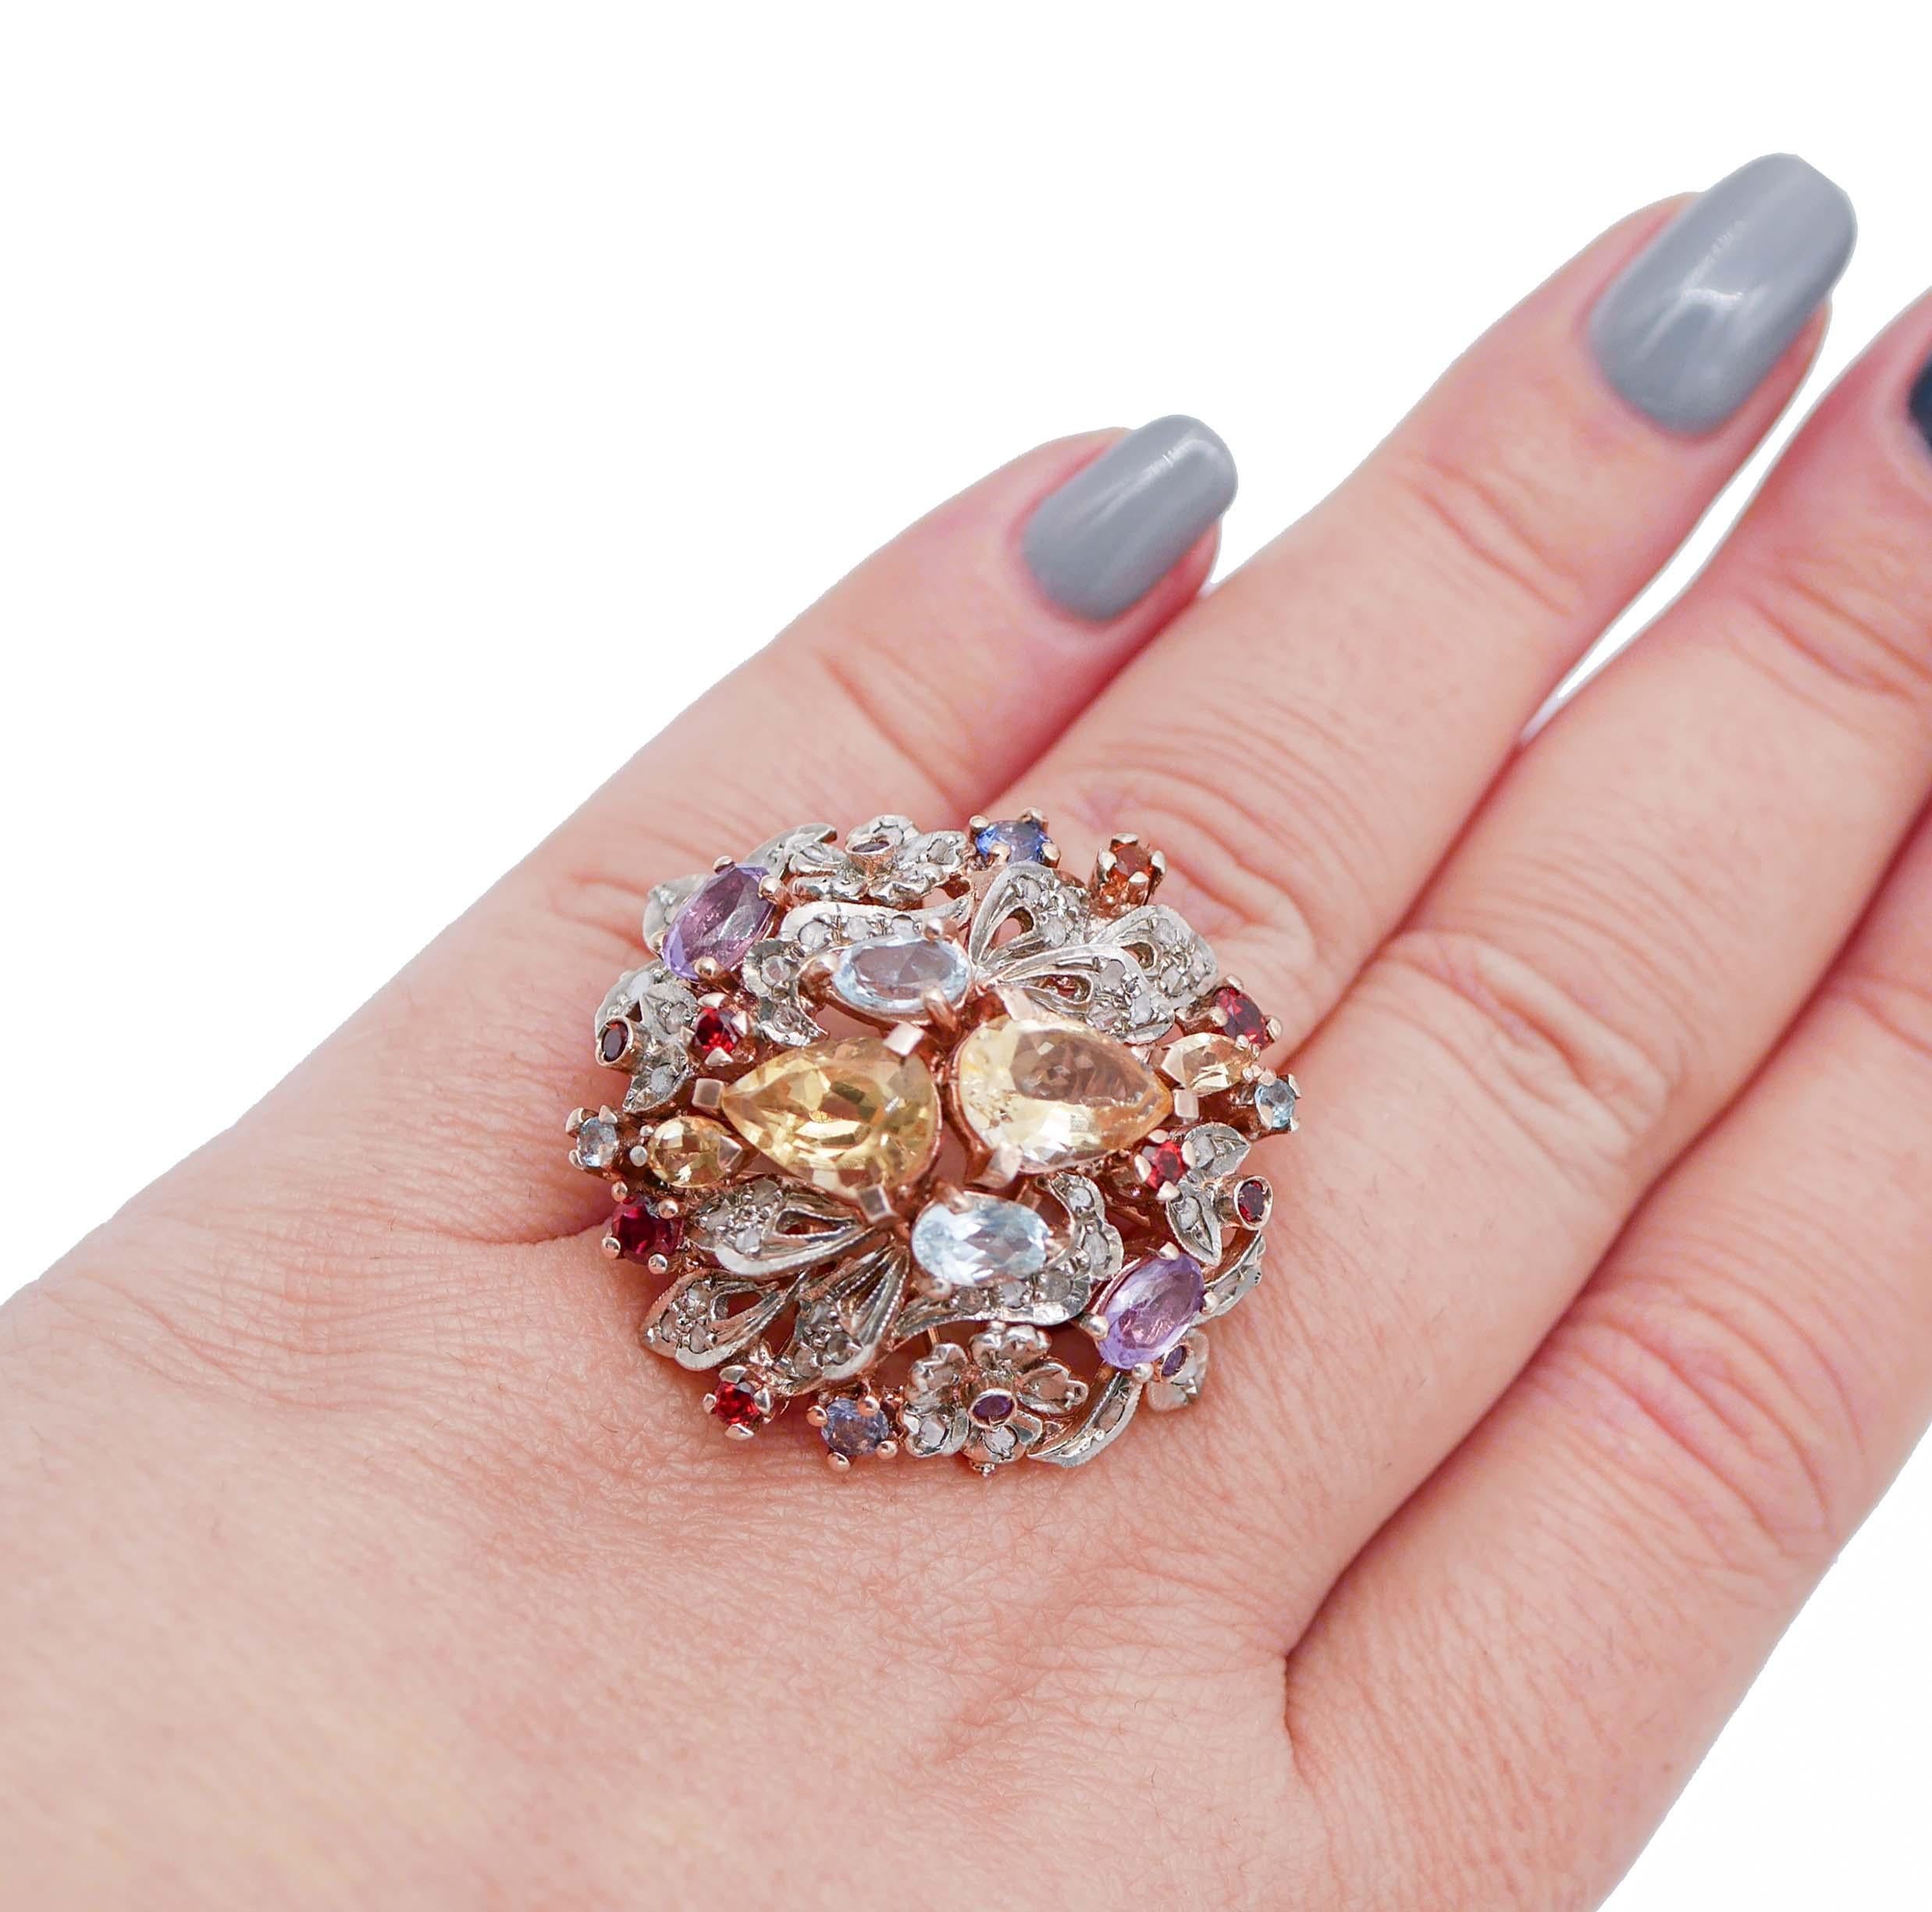 Topazs, Amethysts, Garnets, Diamonds, 14 Karat Rose Gold and Silver Ring In Good Condition For Sale In Marcianise, Marcianise (CE)